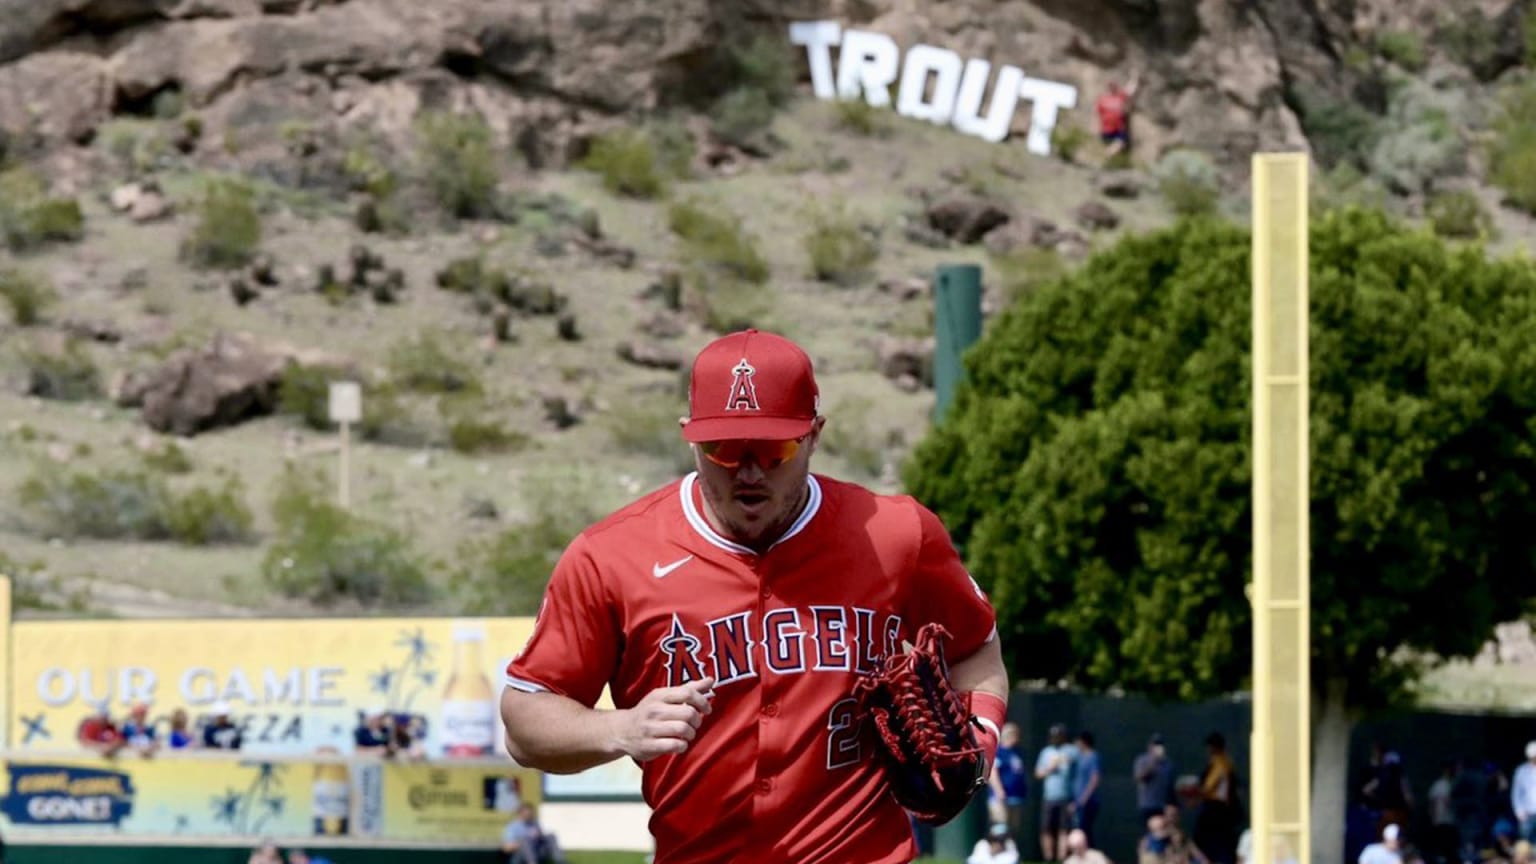 Mike Trout jogs off the field, with huge letters spelling out his last name in the hills beyond the ballpark